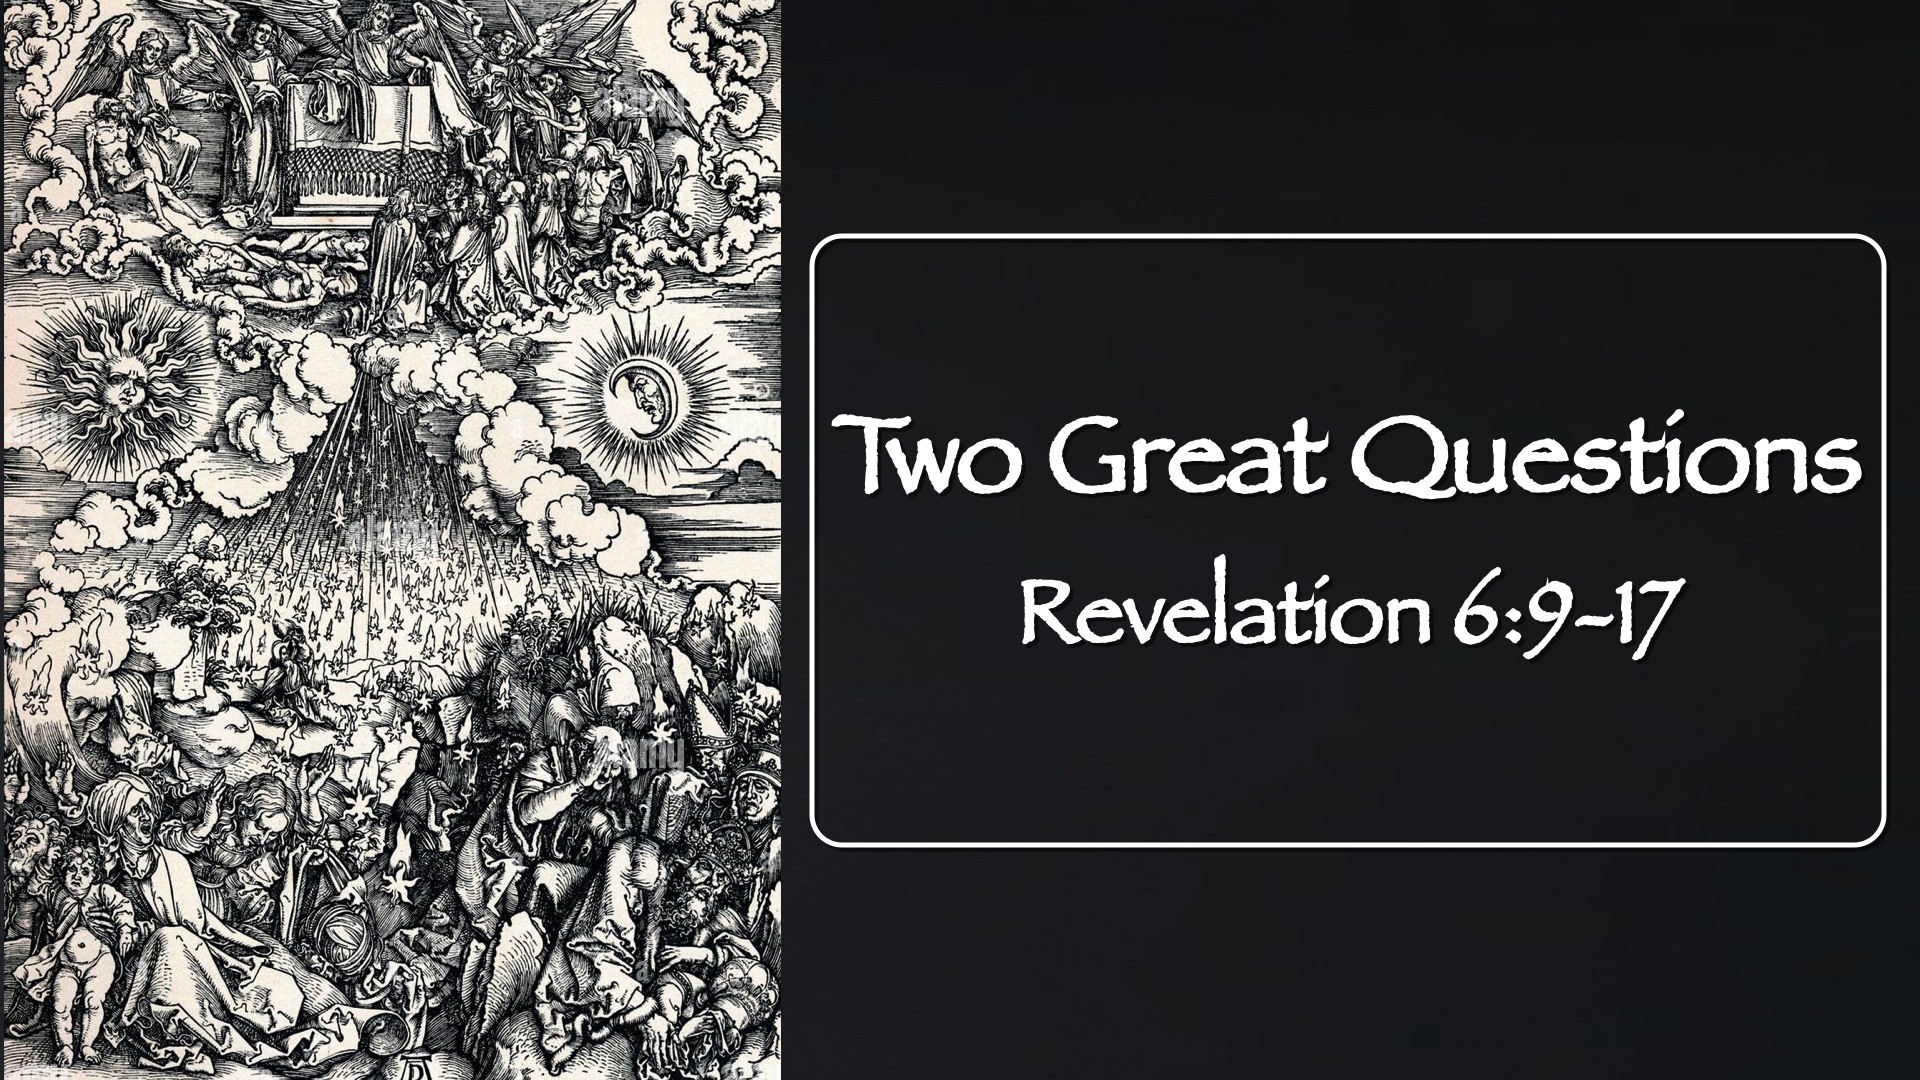 “The Book of Revelation: Two Great Questions”